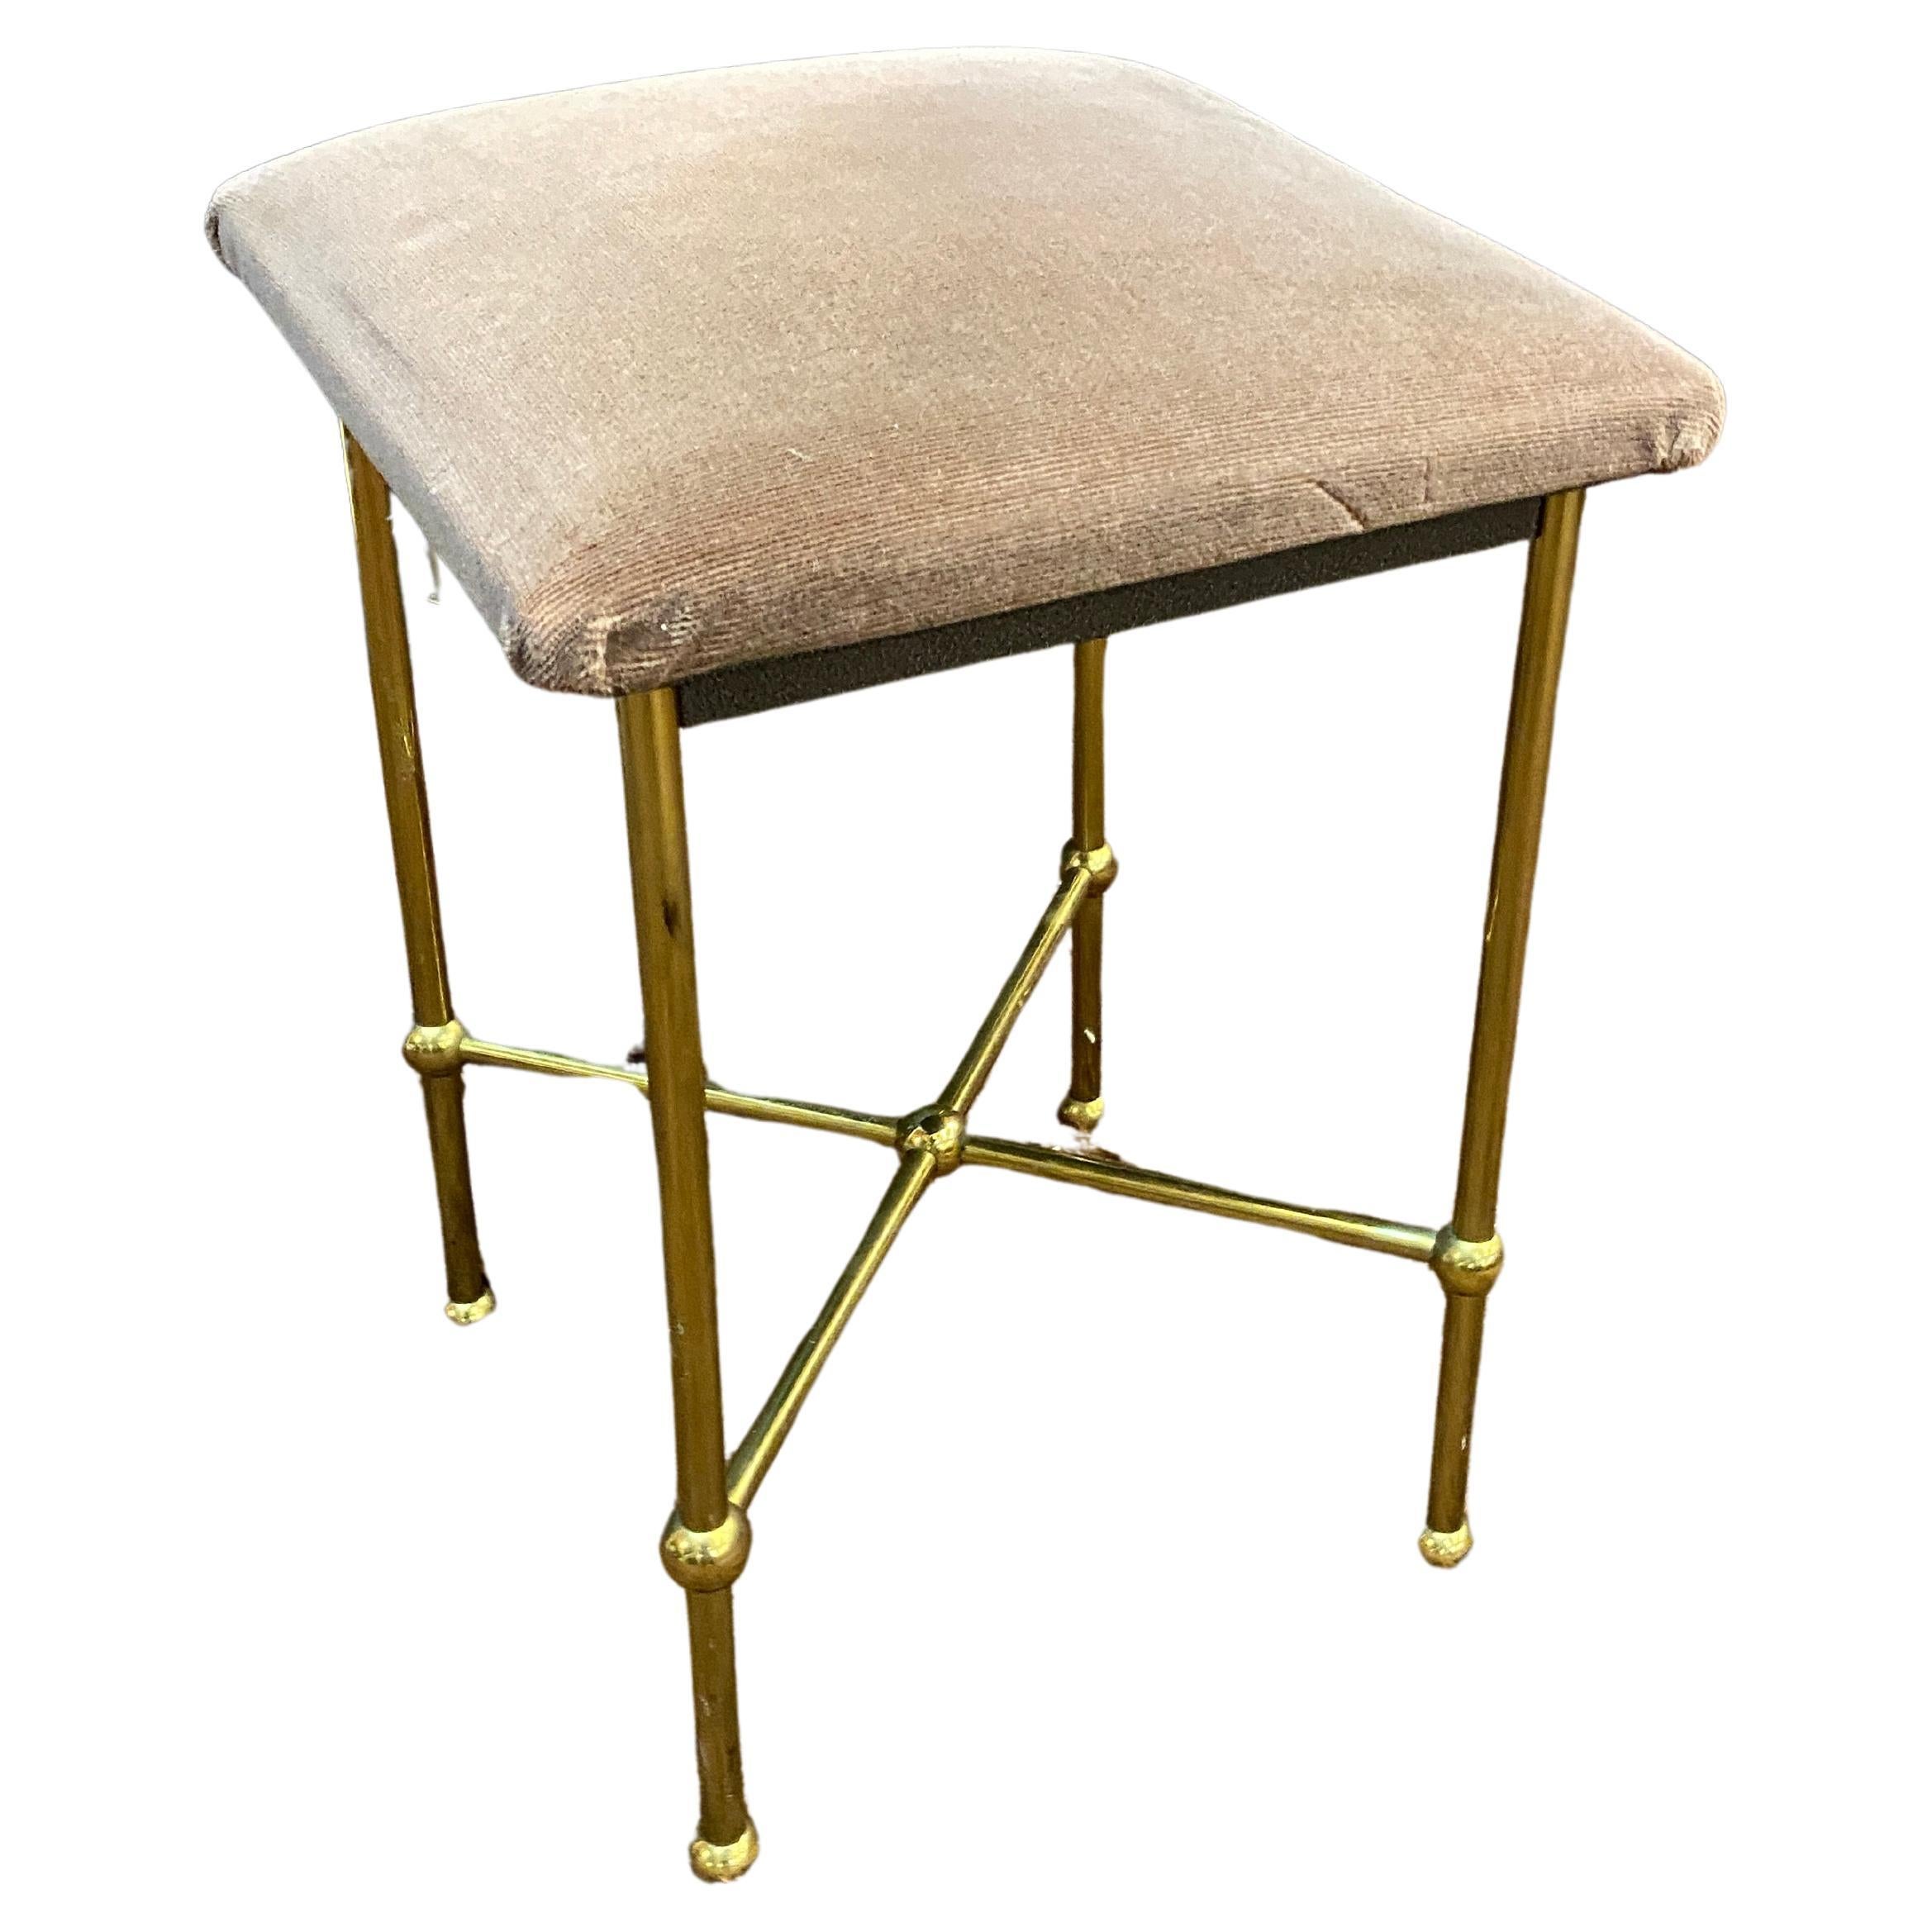 Mid-Century Modern stool in the Baguès style, Jansen, high quality brass base For Sale